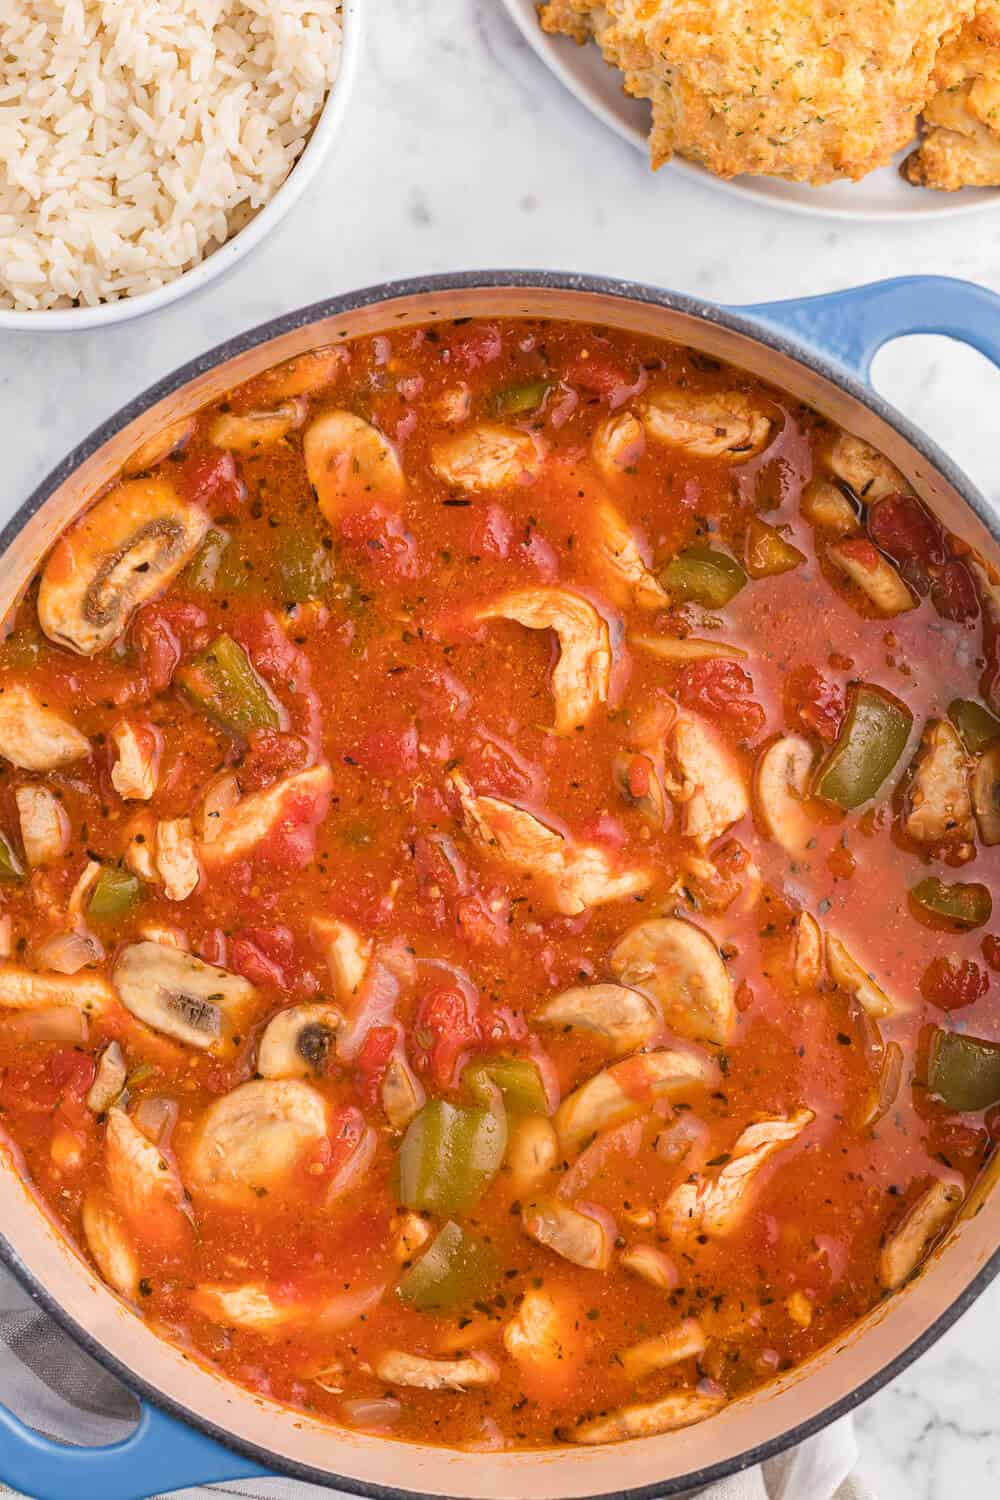 One-Pot Chicken Cacciatore - This is a delicious pantry staple casserole. Made with common ingredients like chicken, green peppers, mushrooms, onions and canned tomatoes, you can throw the ingredients in just one pot - quick to make and quick to clean up!